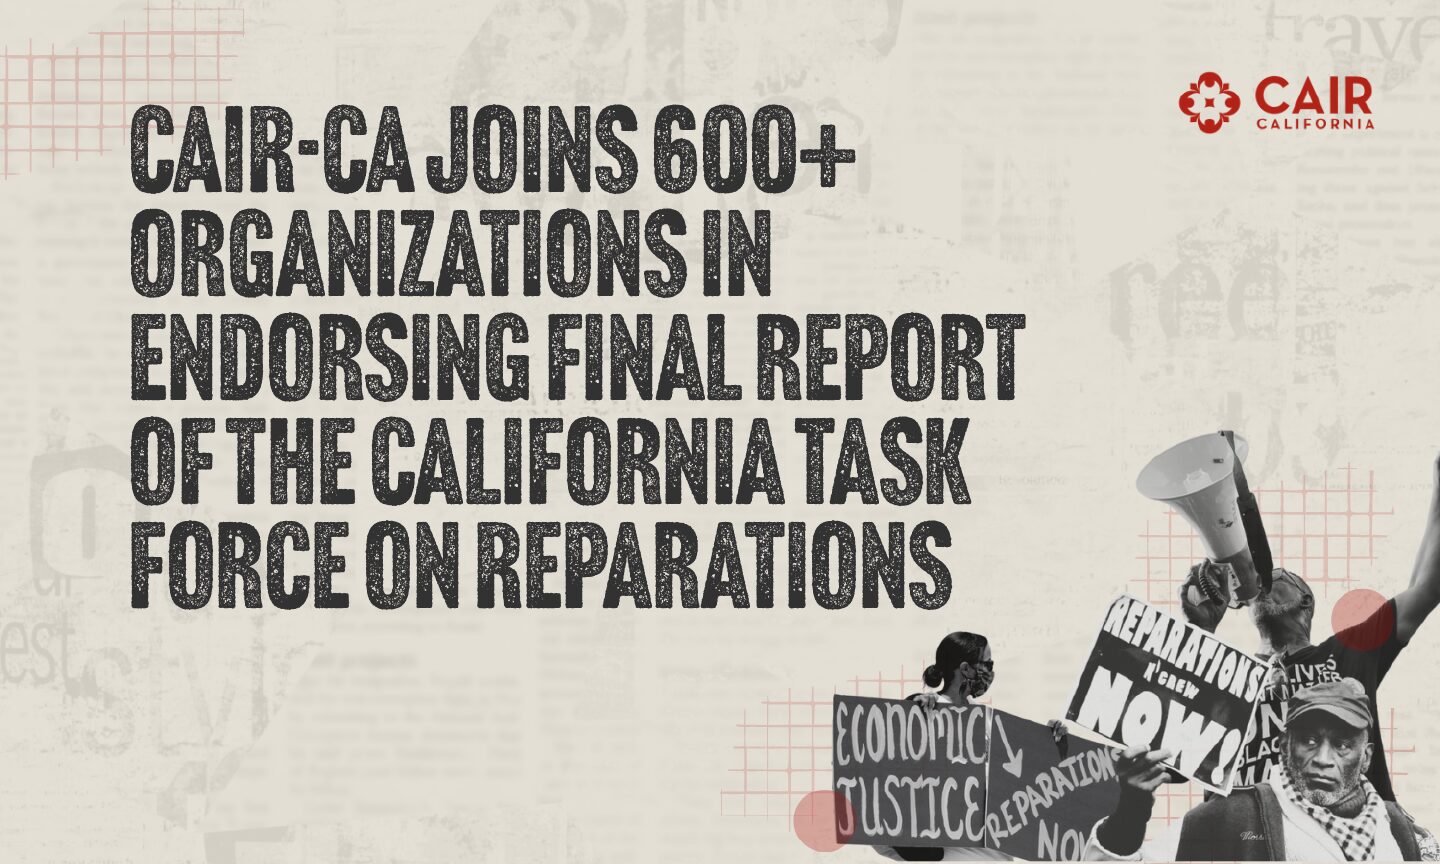 CAIR-CA Joins 600+ Organizations In Endorsing Final Report of the California Task Force on Reparations